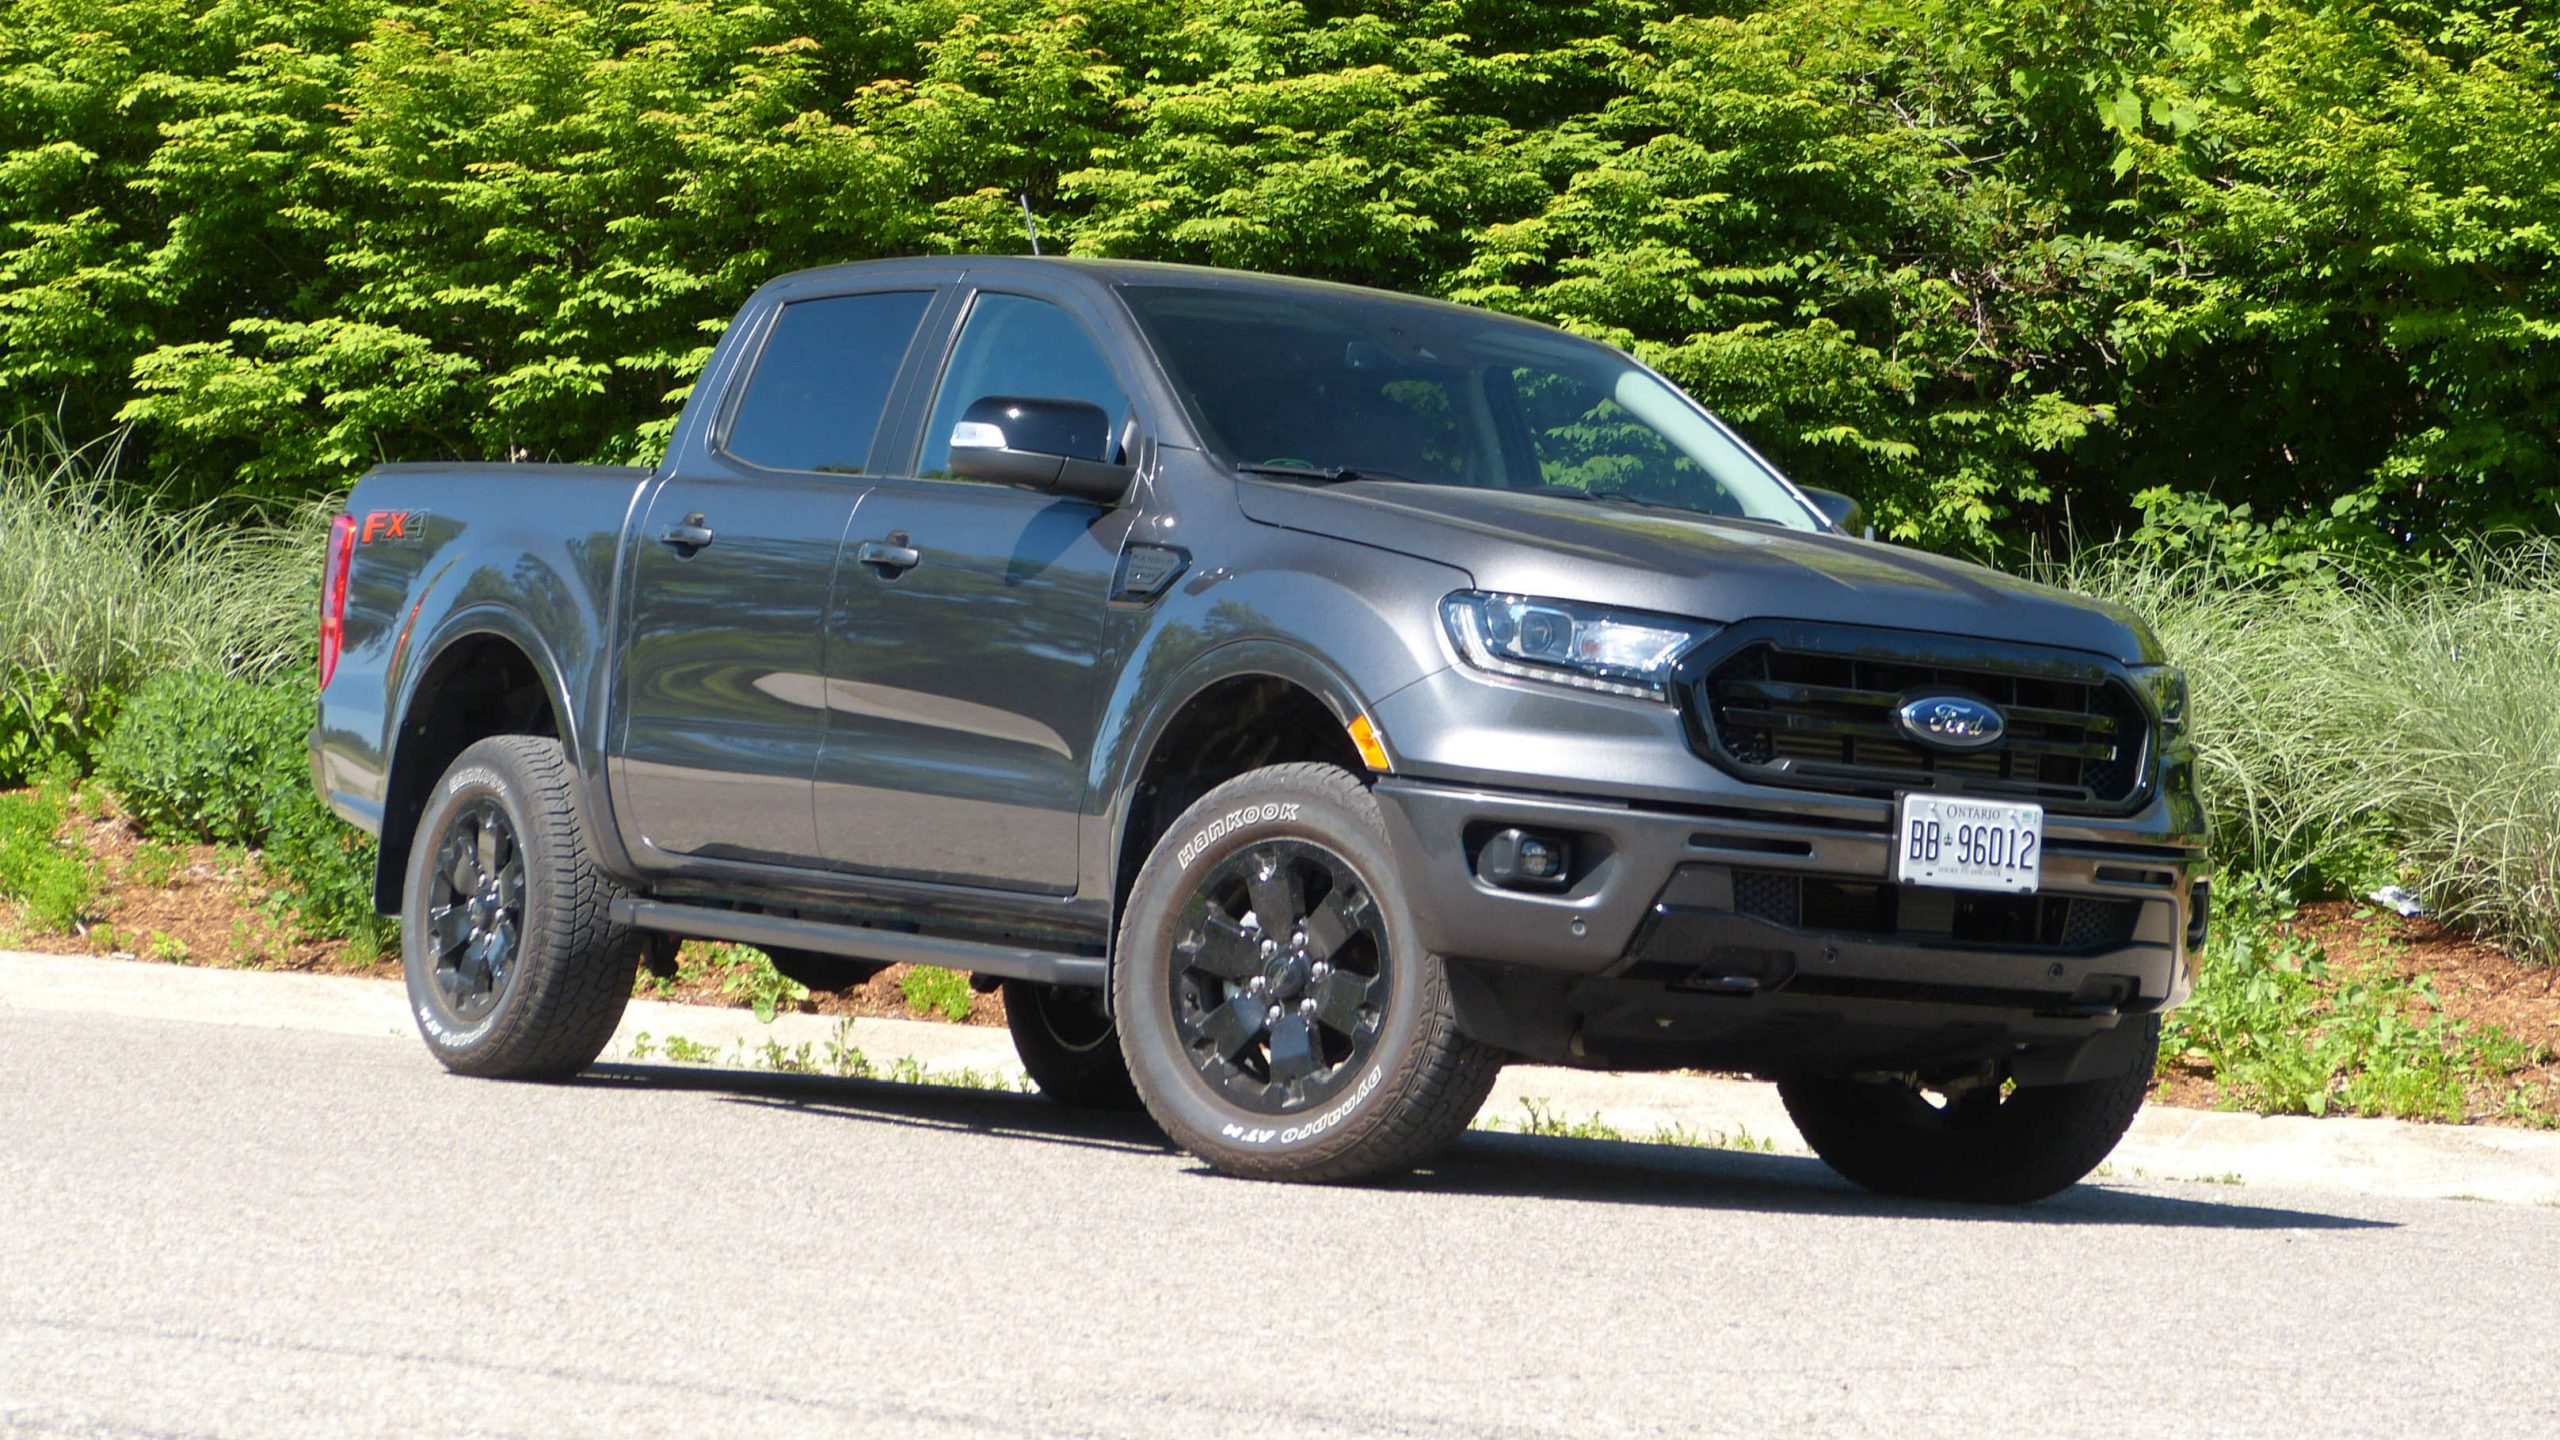 14 - The Least Reliable Cars You Can Buy - Ford Ranger Pickup Truck